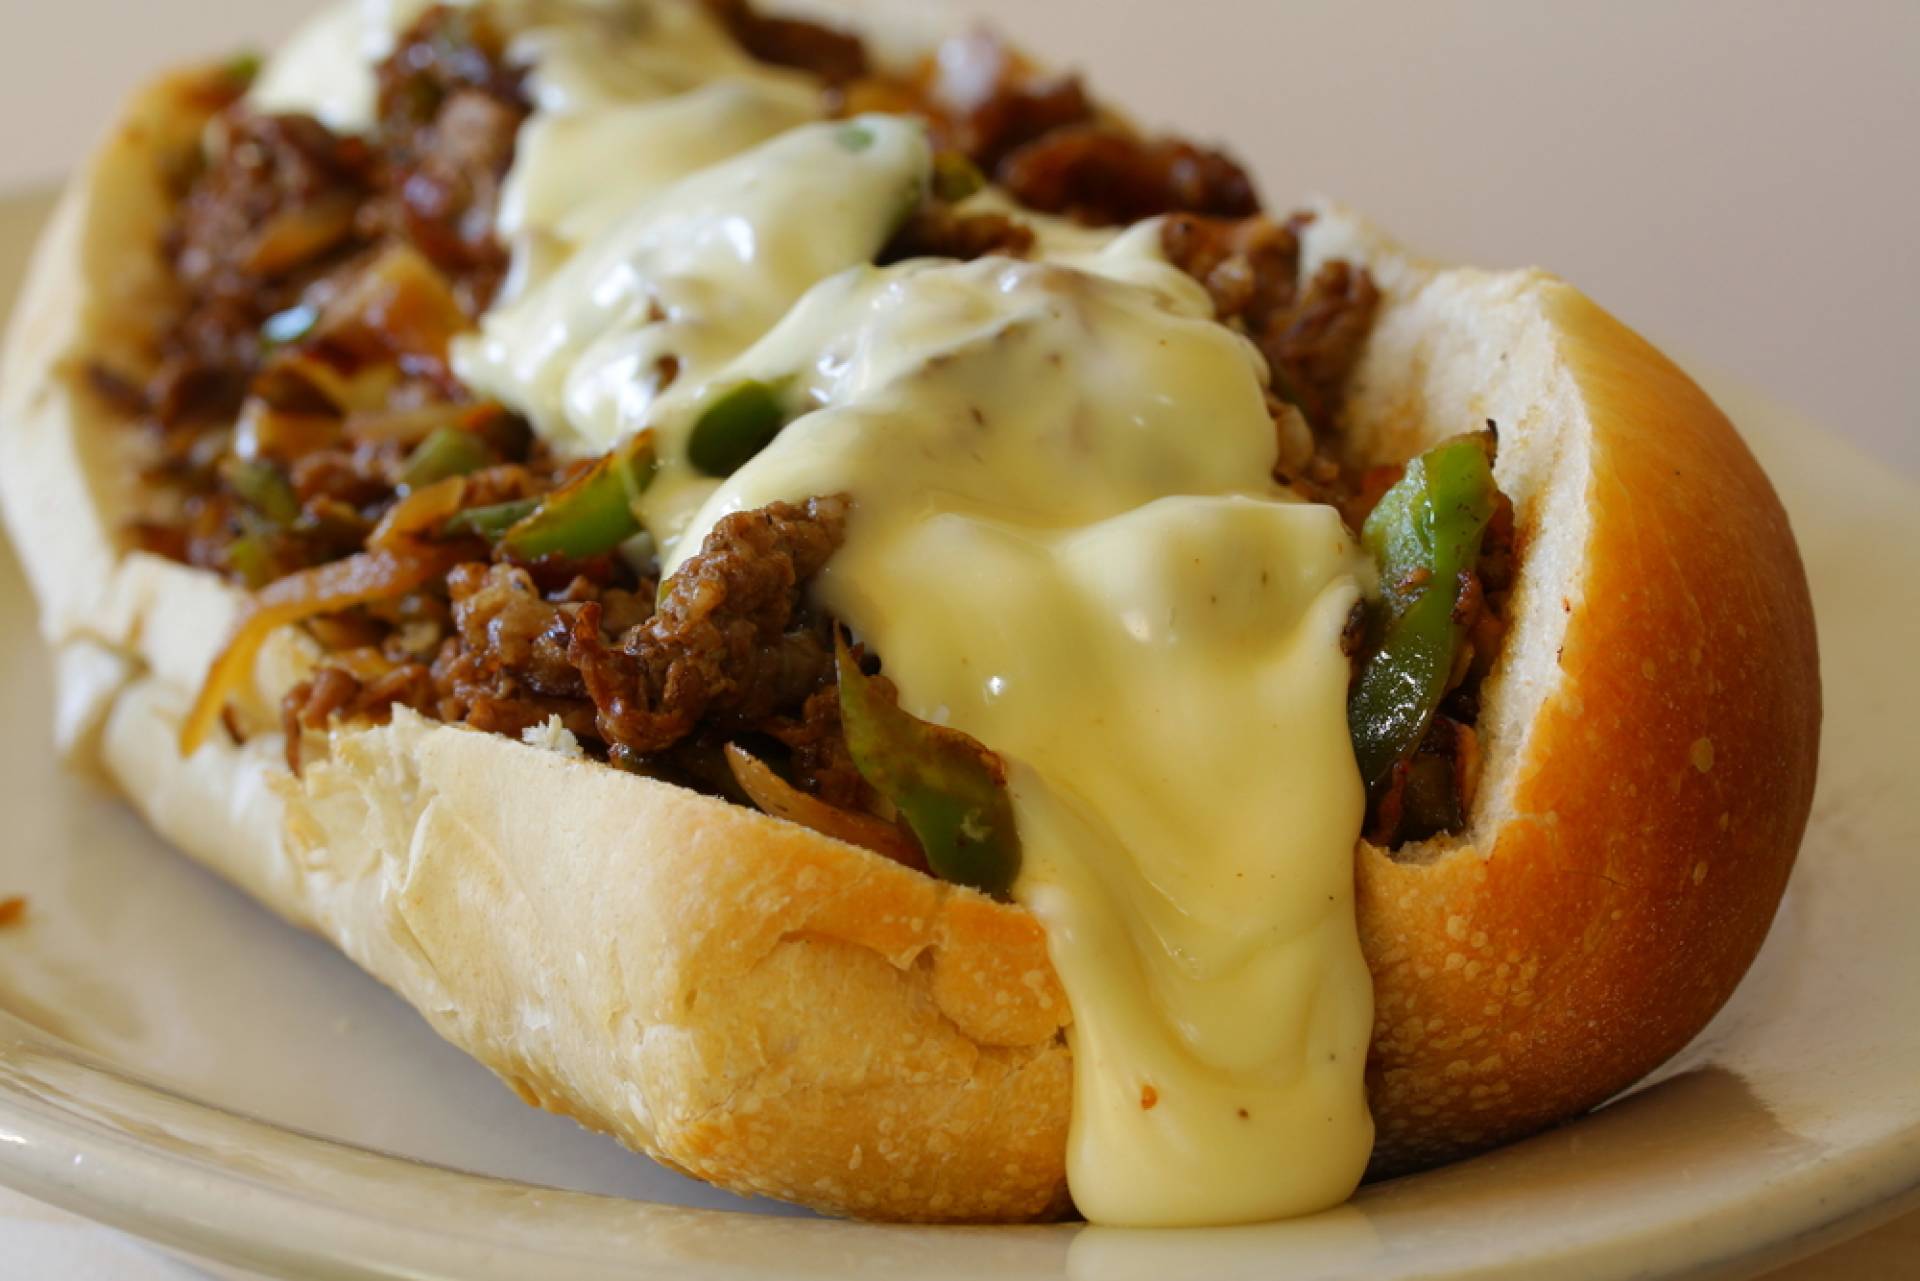 Philly Cheesesteak with Shoestring Fries